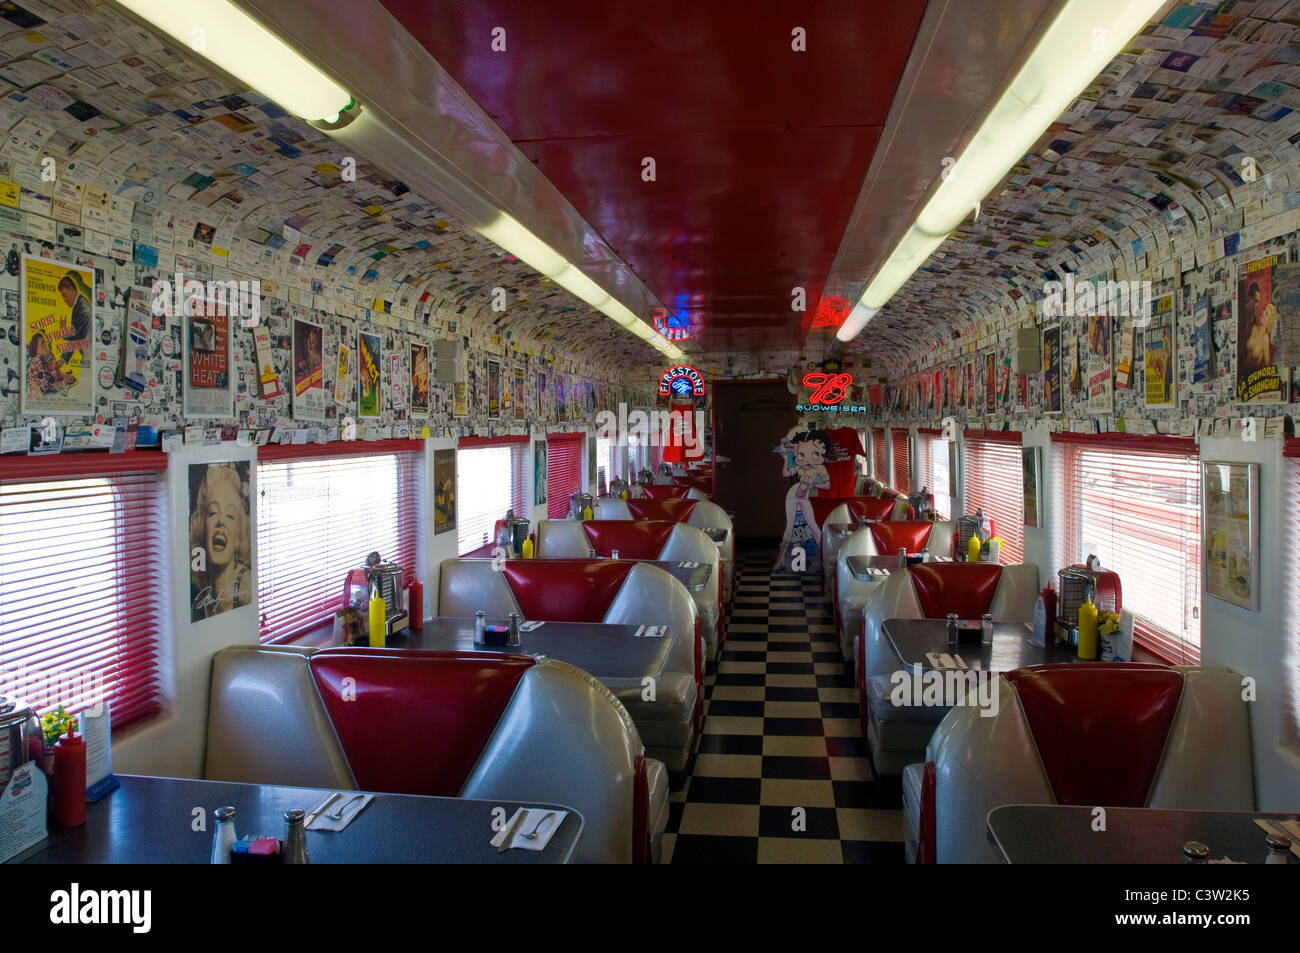 1950's style Rock n' Roll Diner in an old converted train car coach, Oceano, California Stock Photo